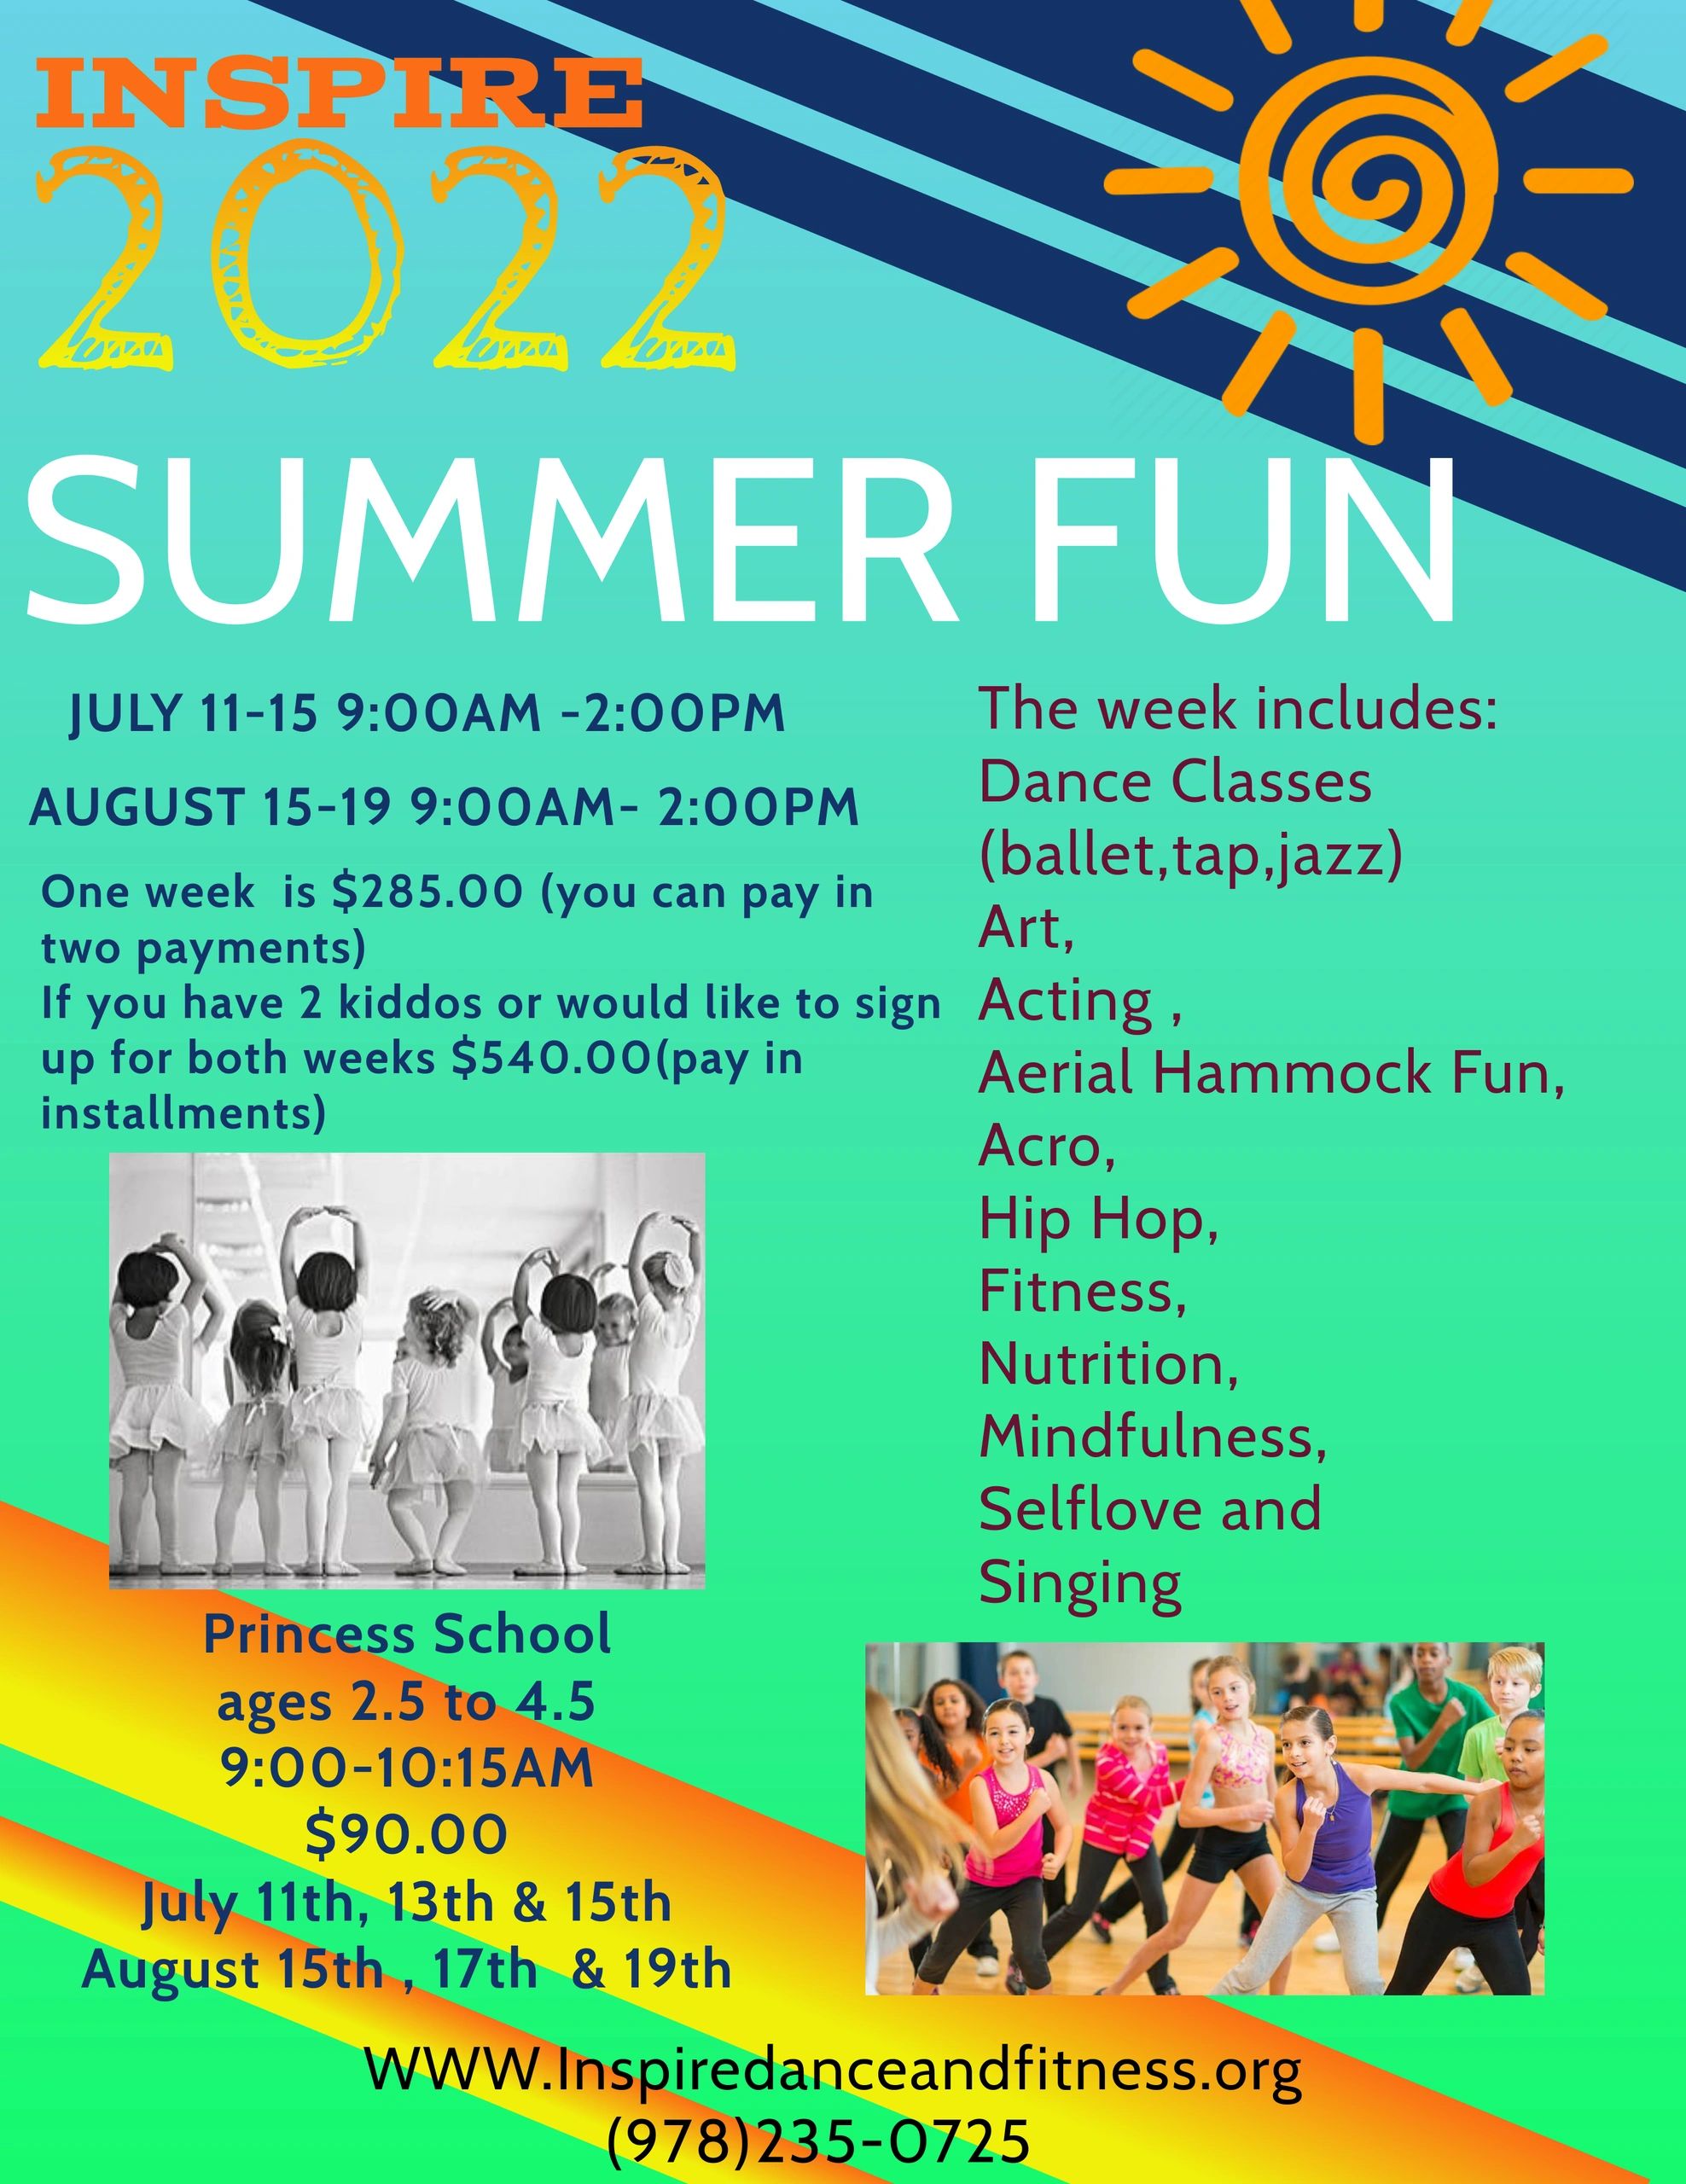 Summer Fun at Inspire. 
So much fun for all kiddos aged 5-12yrs!
July 11-15th sign up:
https://www.w